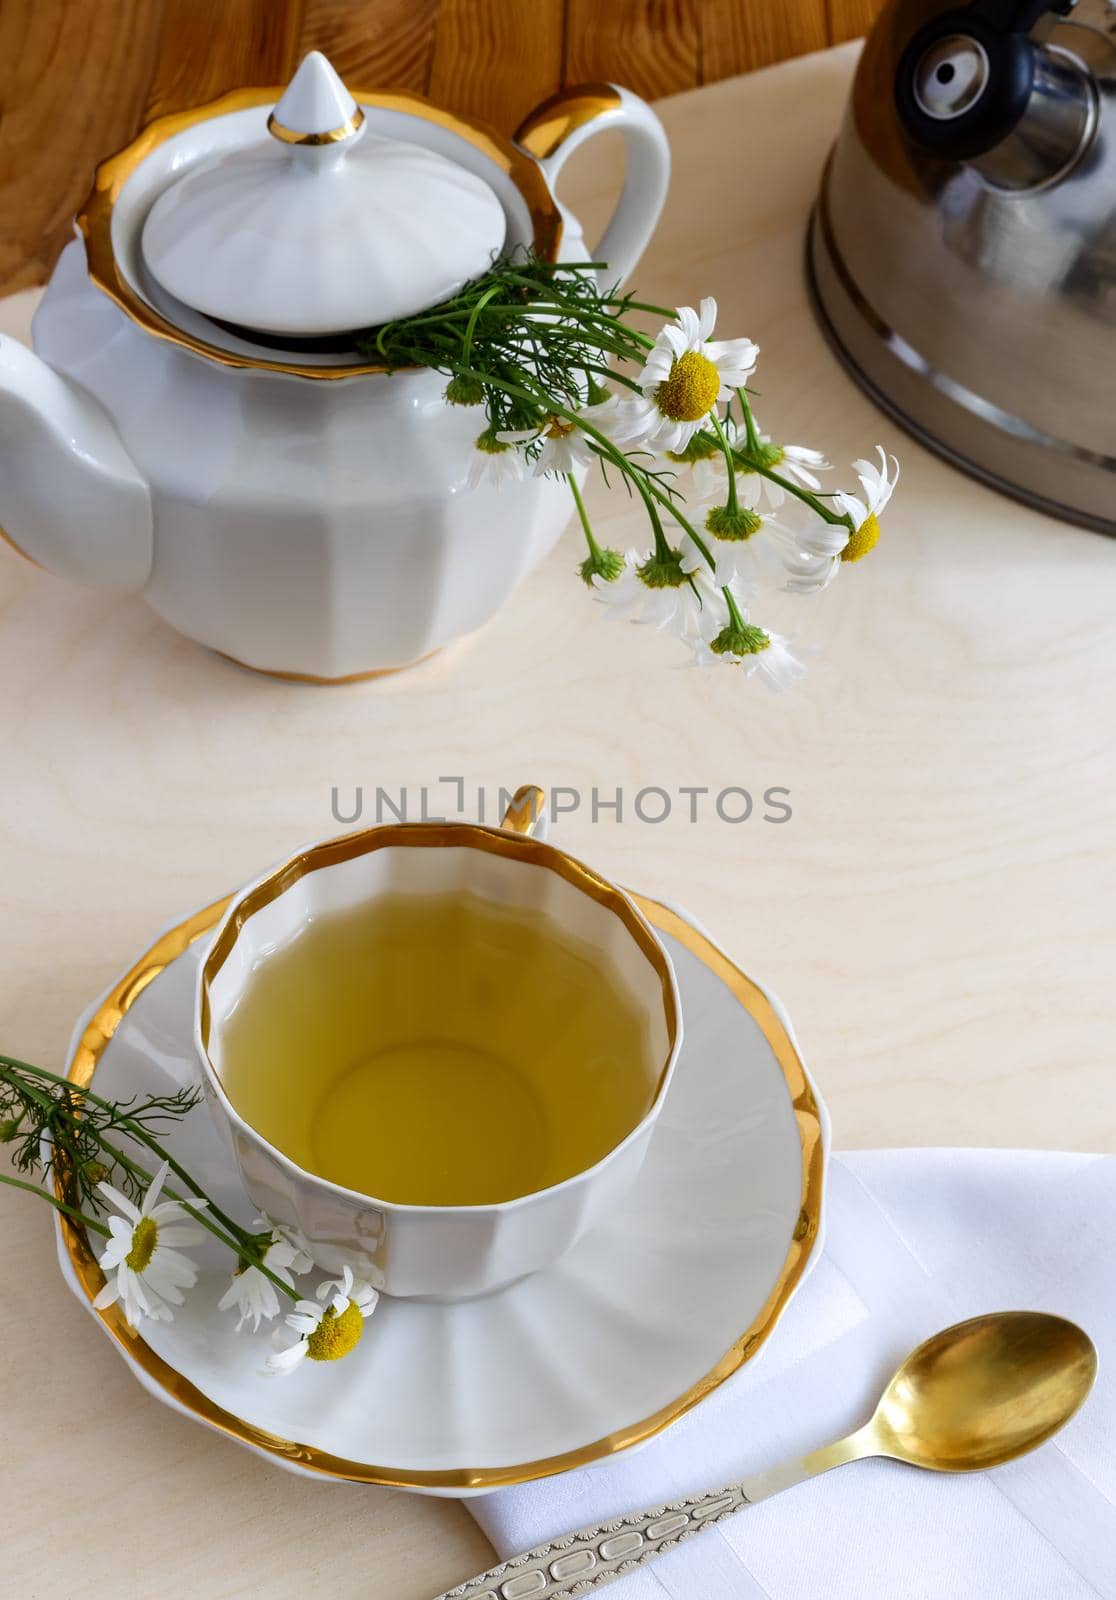 Medicinal chamomile is a valuable herbal medicinal raw material. Next in a Cup of herbal tea with chamomile infusion.